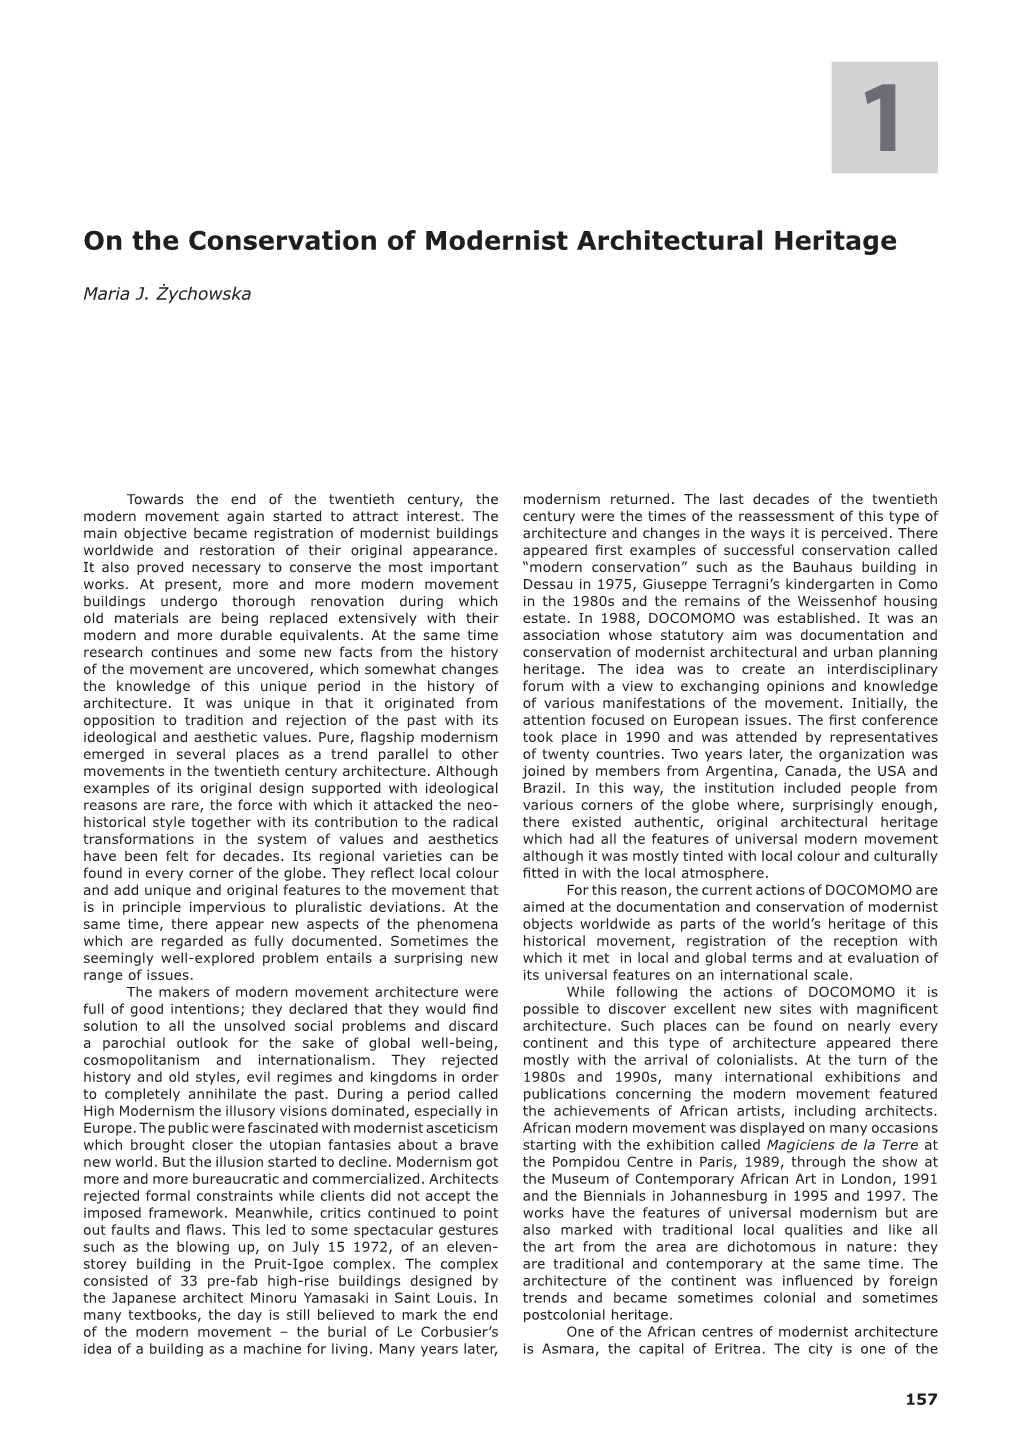 On the Conservation of Modernist Architectural Heritage